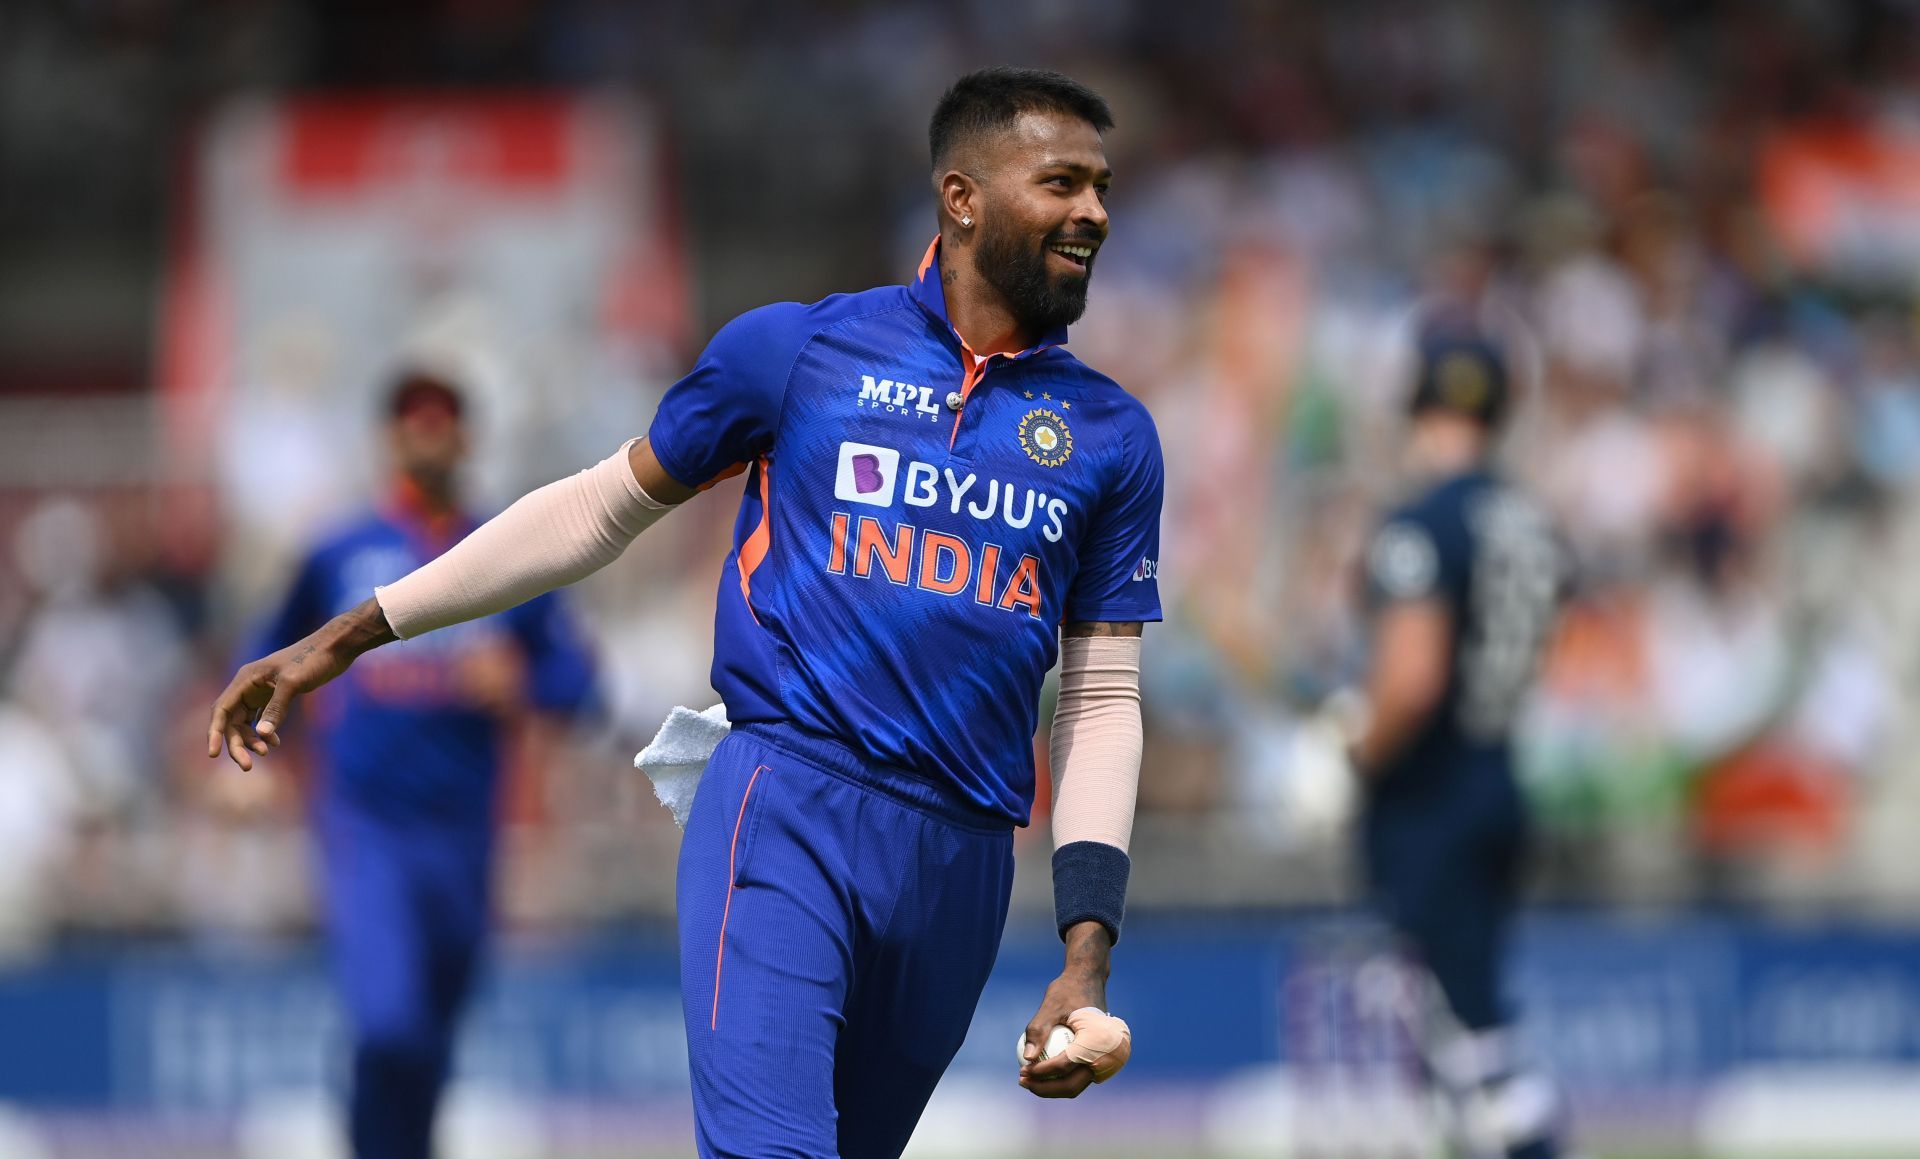 Hardik Pandya gave an excellent account of himself as a bowler in the ODI series against England